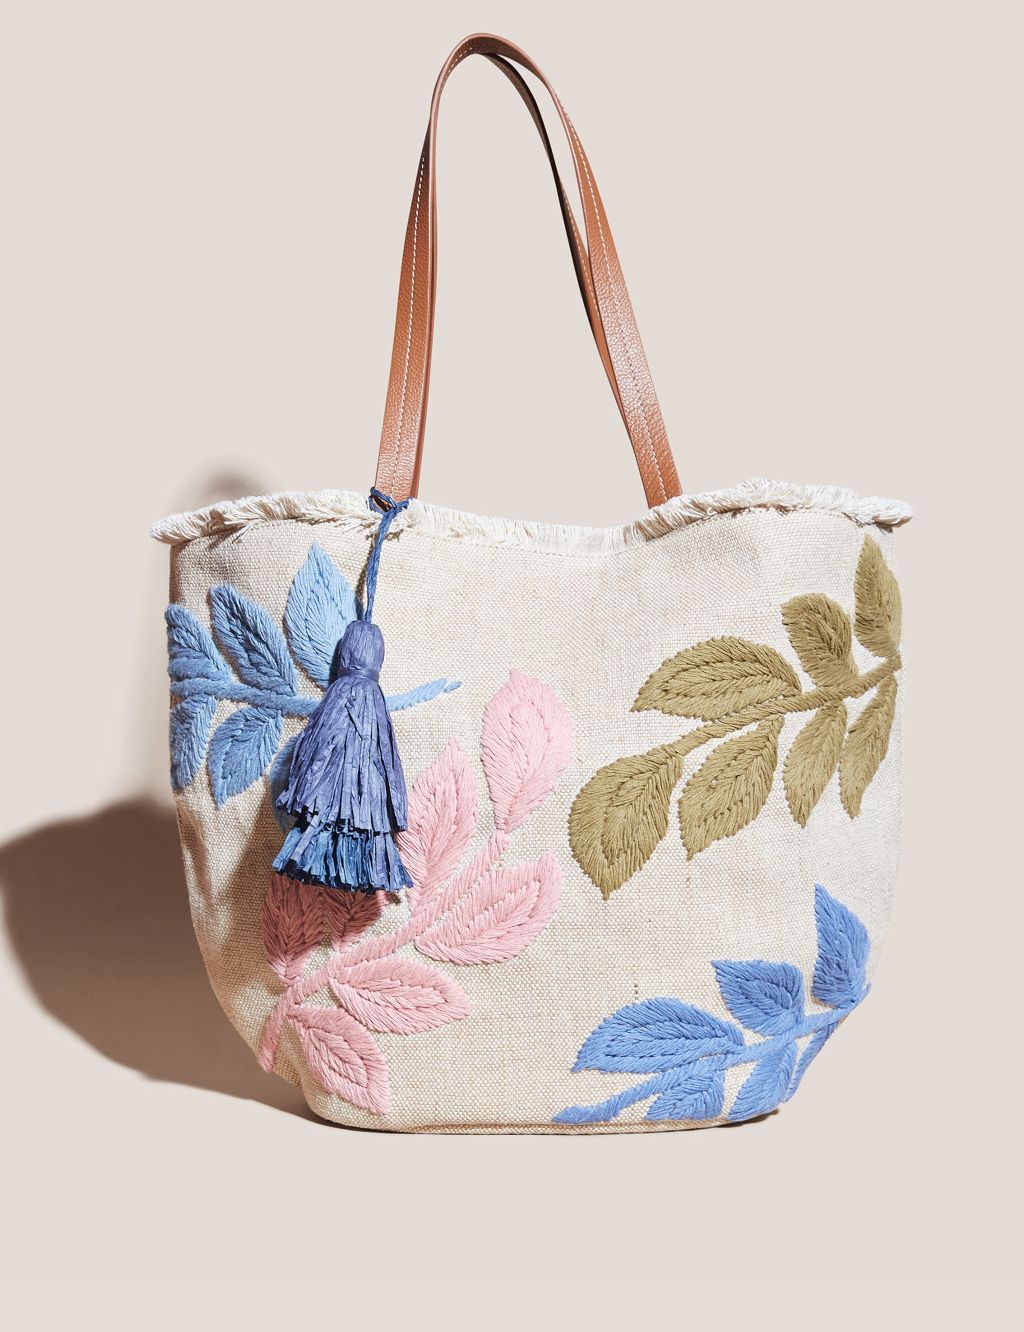 Cotton Blend Embroidered Tote Bag image 1